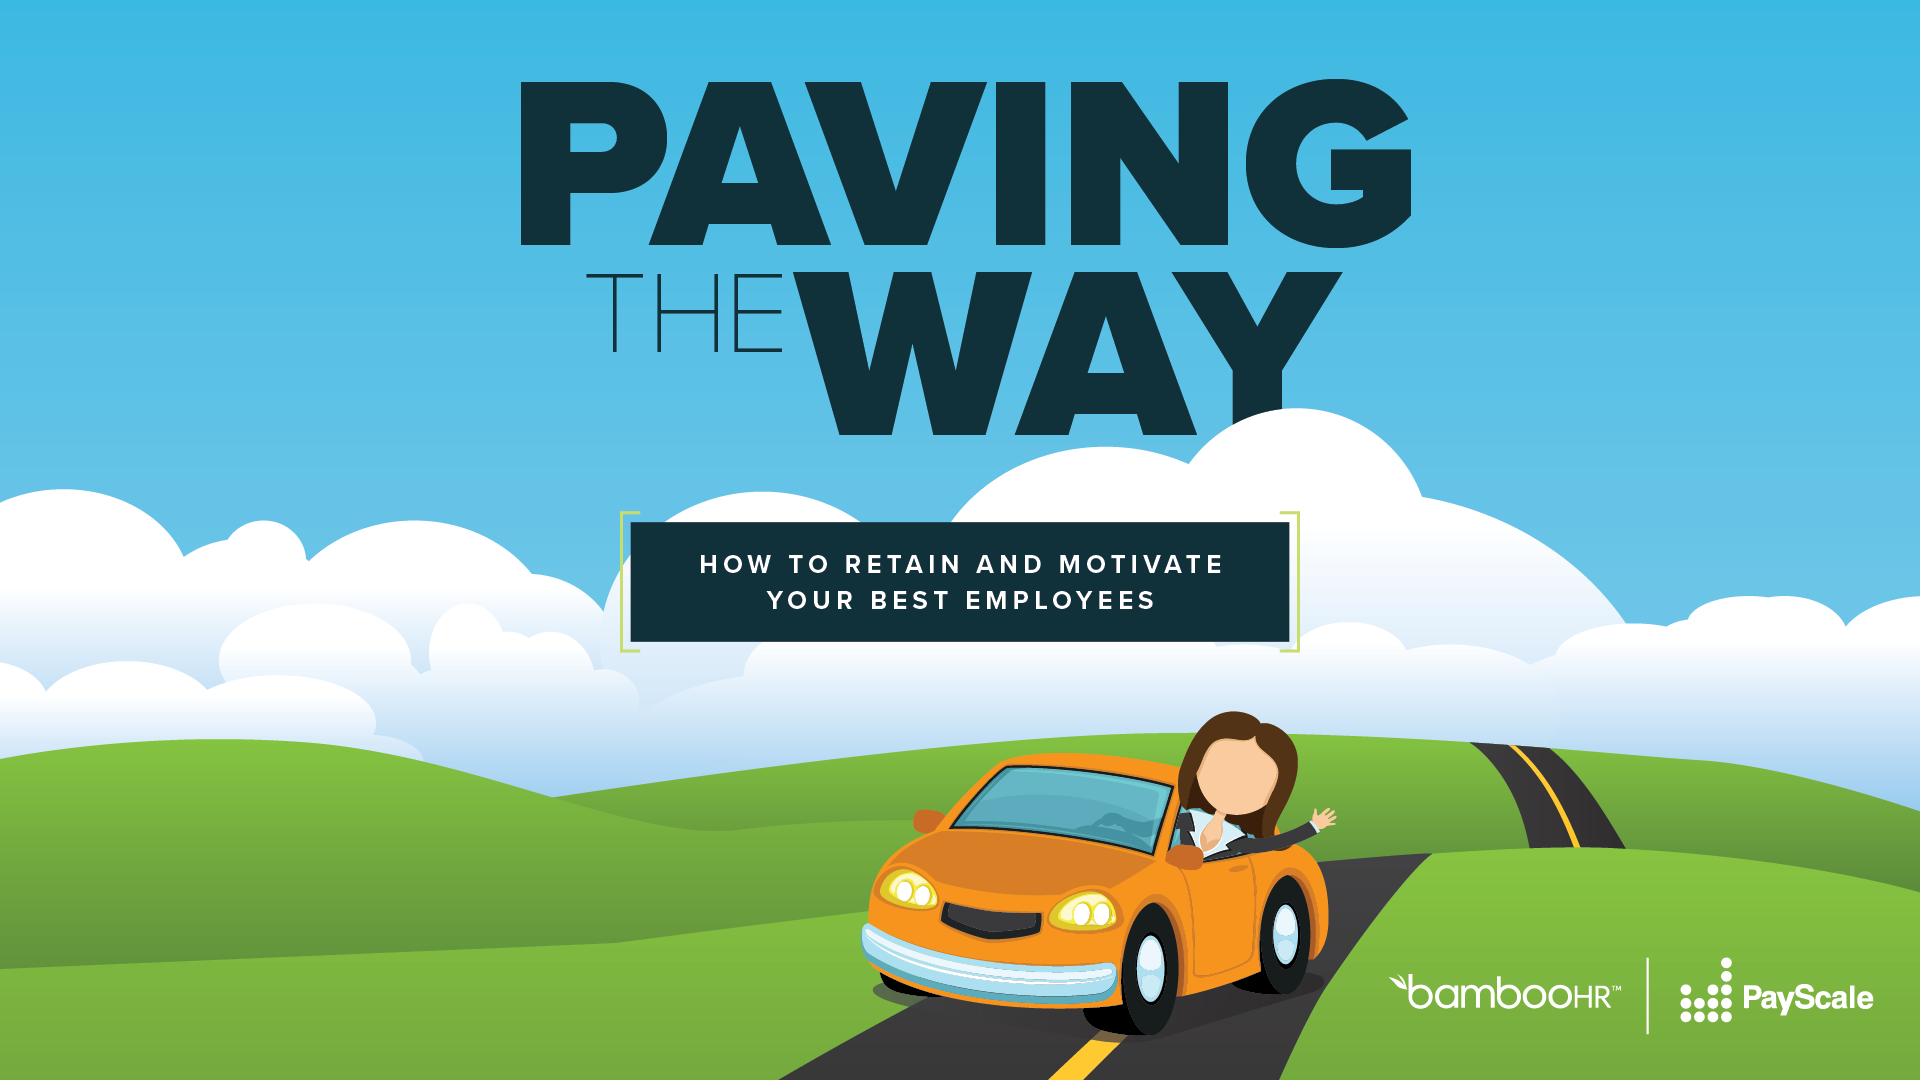 Paving the Way: How to Retain and Motivate Your Best Employees